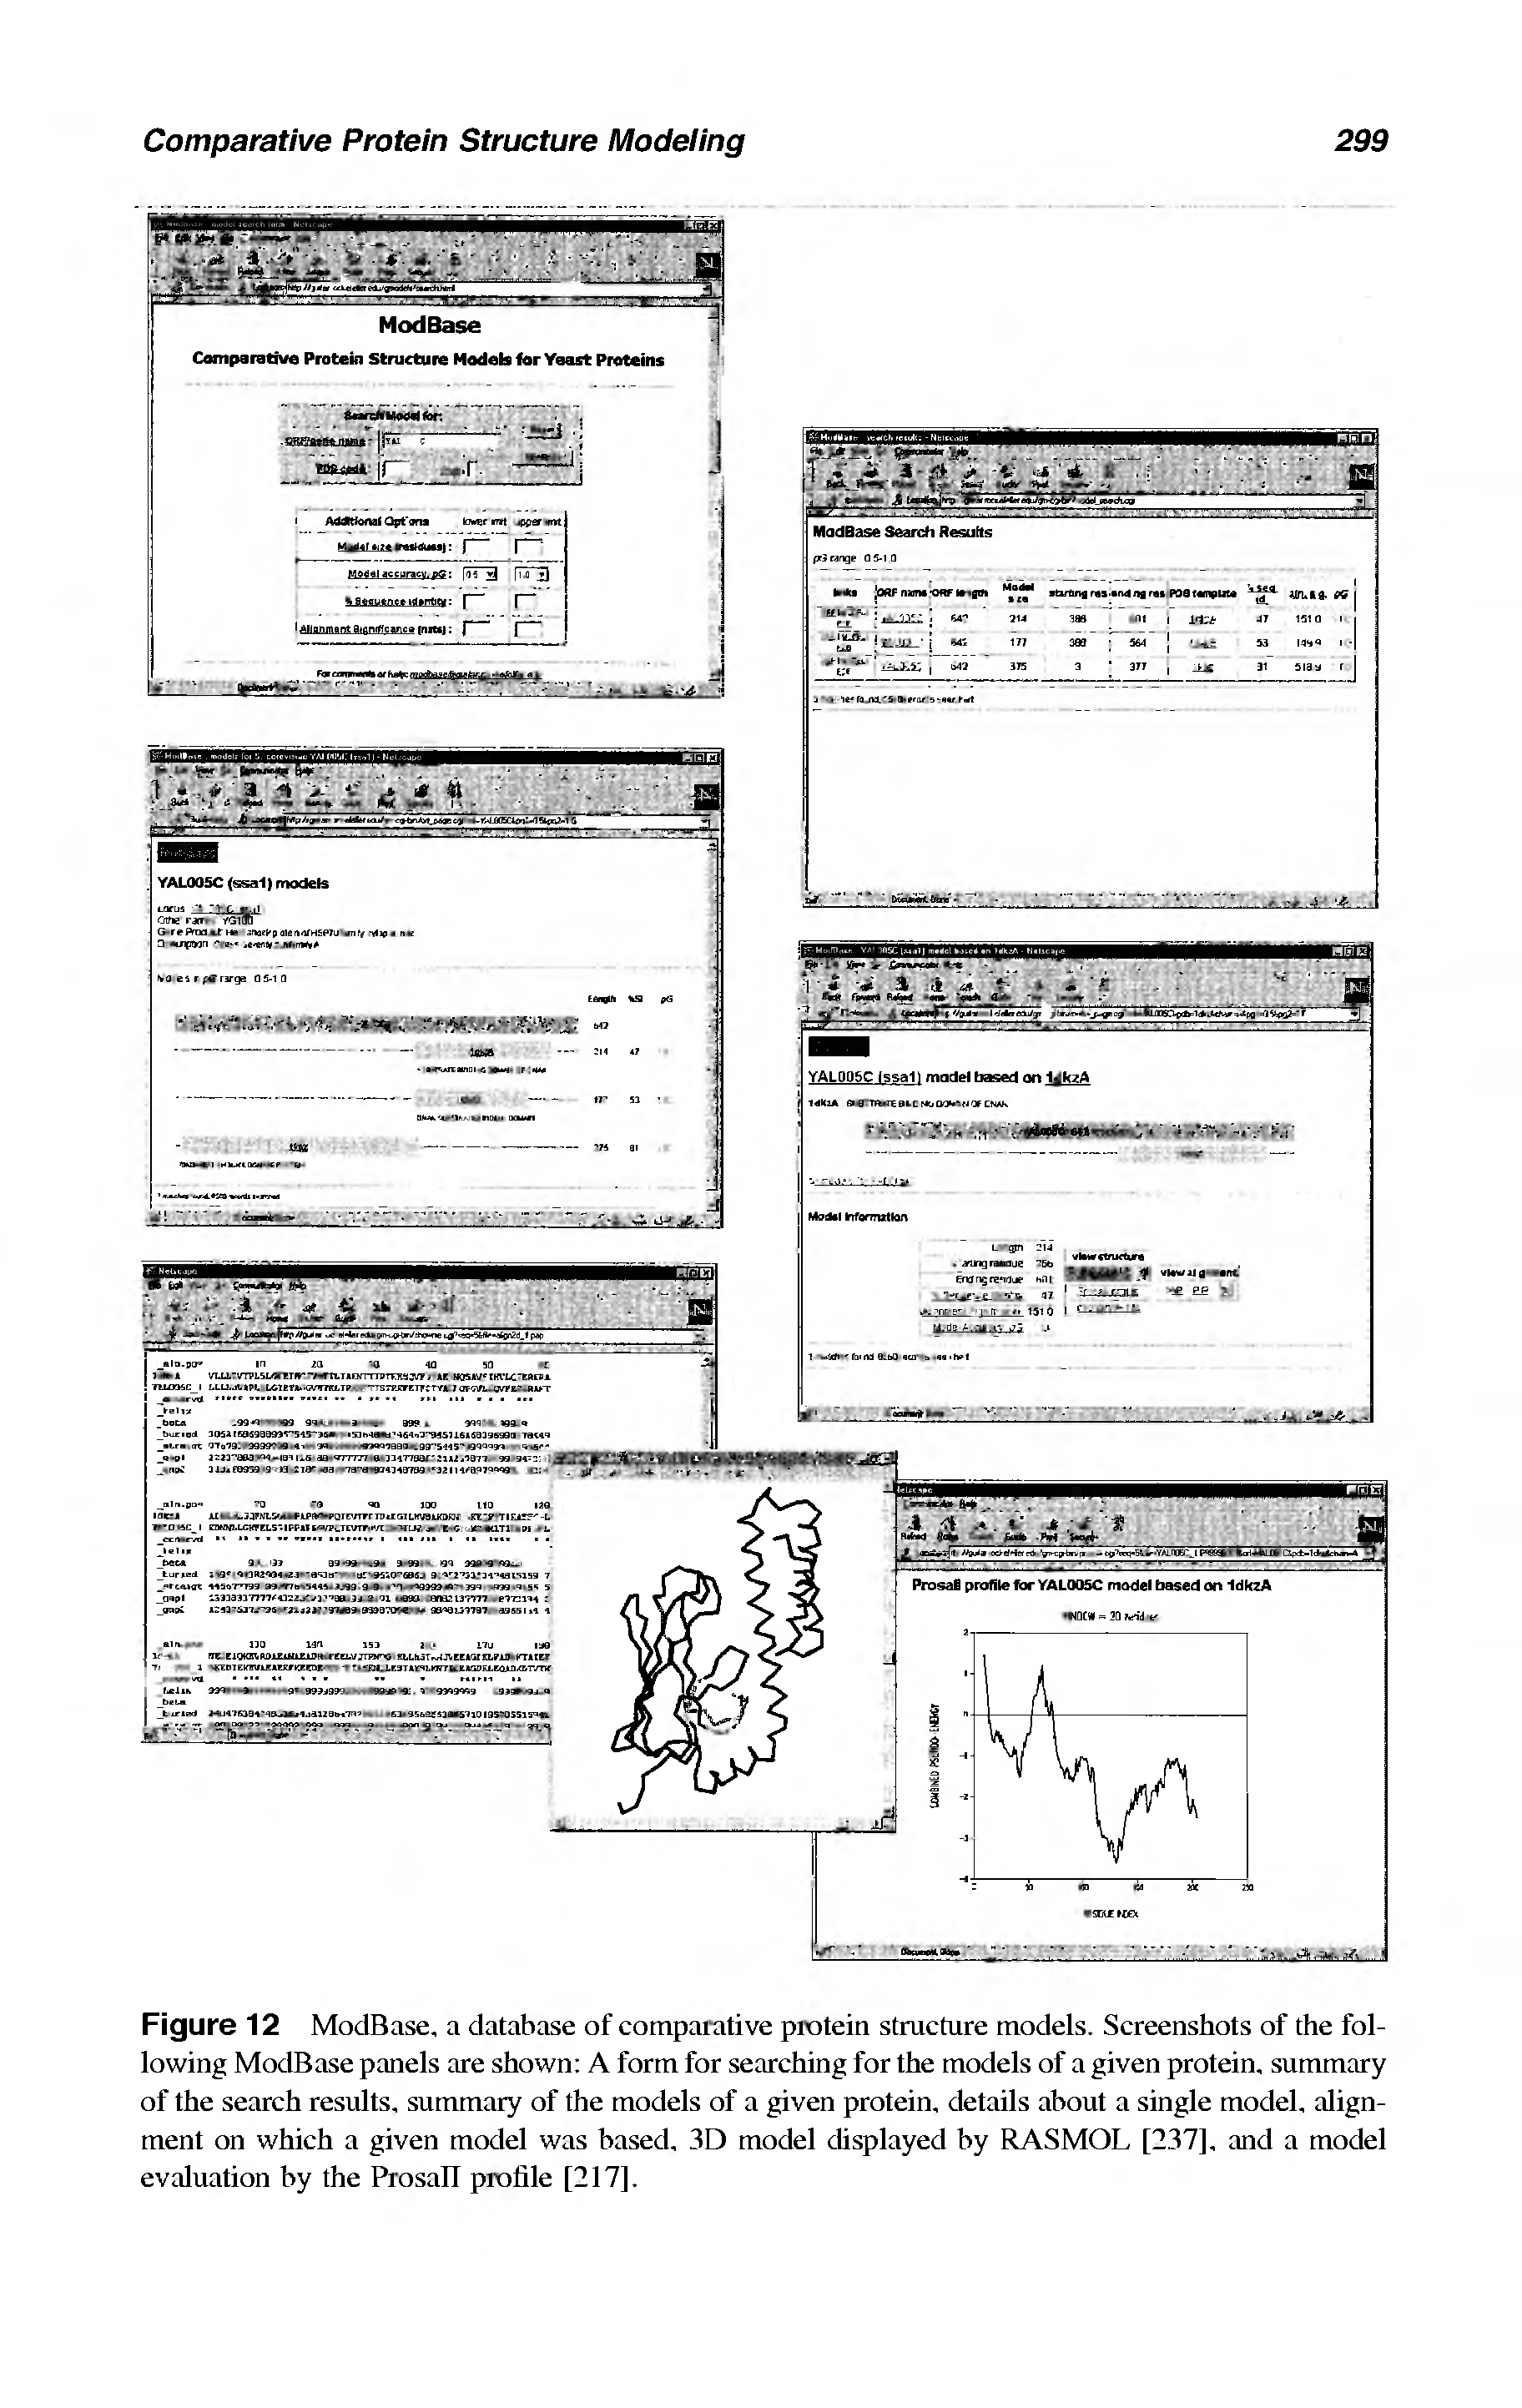 Figure 12 ModBase, a database of comparative protein stracture models. Screenshots of the following ModBase panels are shown A form for searching for the models of a given protein, summary of the search results, summary of the models of a given protein, details about a single model, alignment on which a given model was based, 3D model displayed by RASMOL [237], and a model evaluation by the Prosall profile [217],...